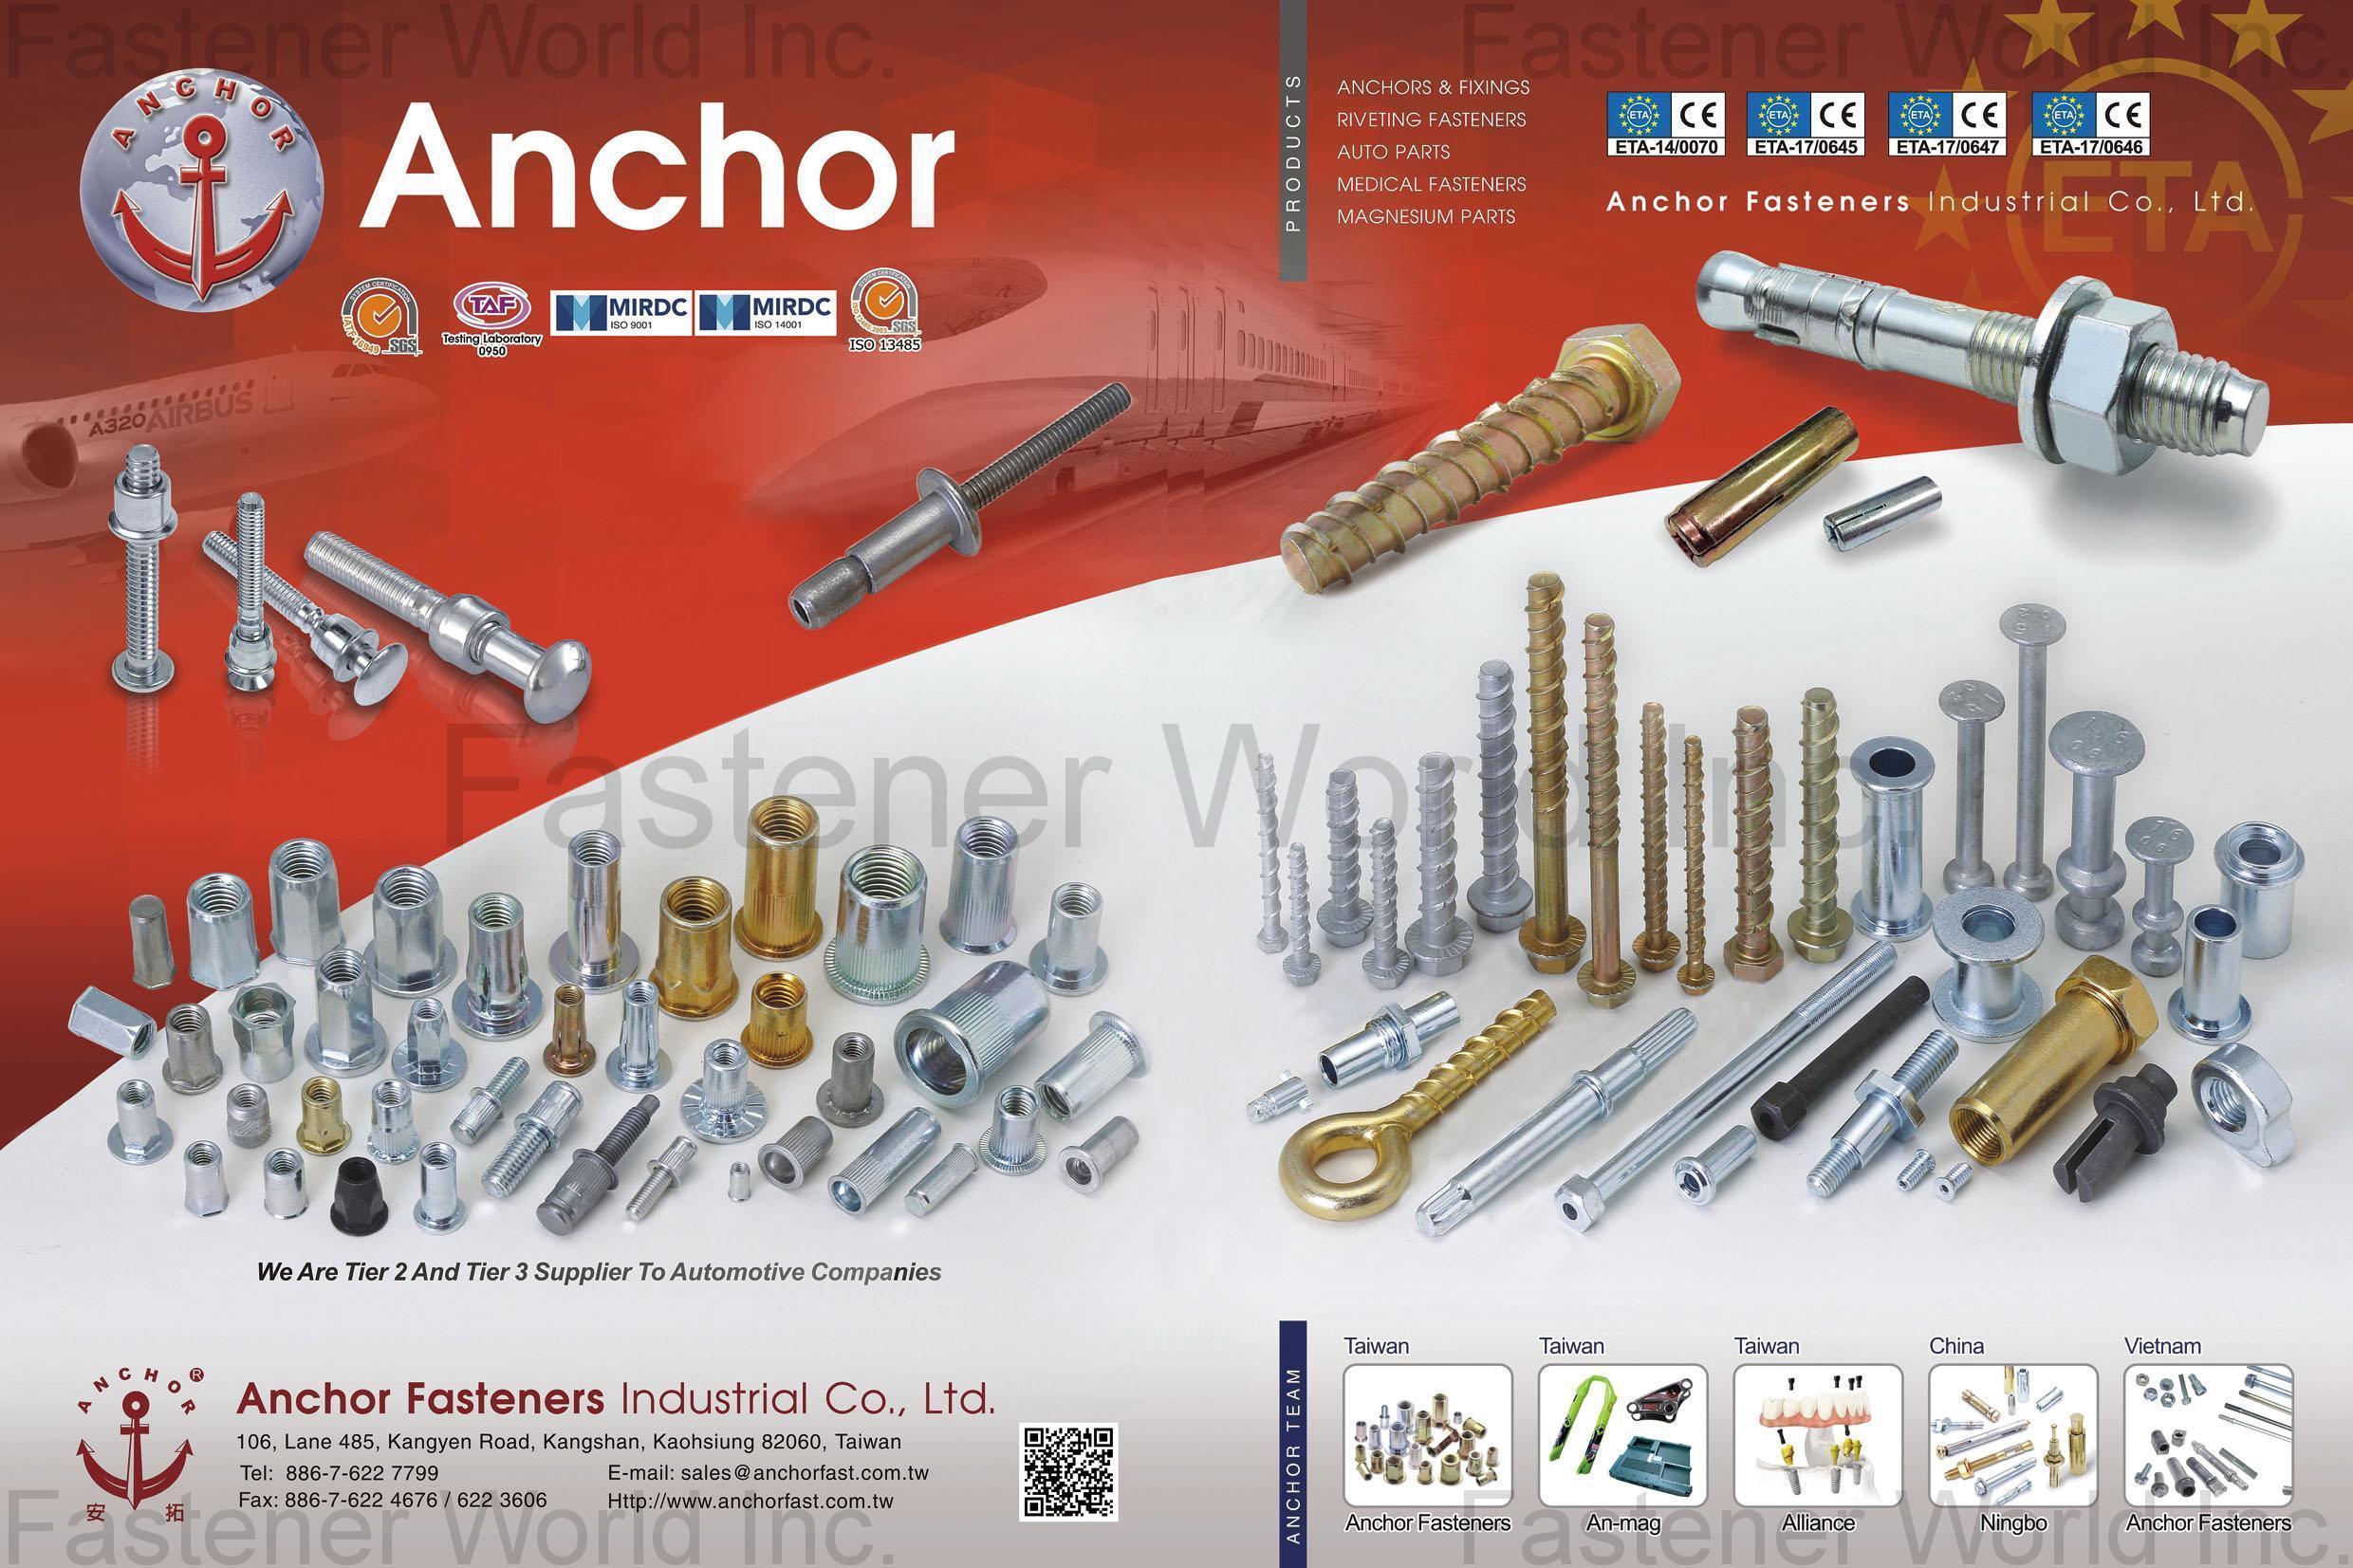 ANCHOR FASTENERS INDUSTRIAL CO., LTD.  , Drop-in Anchors, Expansion Anchors, Wire Anchors, Blind Nuts / Rivet Nuts, Sleeve Anchors, Anchor Bolts, Automotive Parts, Fixing, Anchor Nuts, Power Blind Rivets, Clinching Fasteners, Anchor Thread, Anchor Stud, Jack Nuts, Split Nuts, Rubber Nuts, Wheel Hub Bolts, Ball Studs & Cases